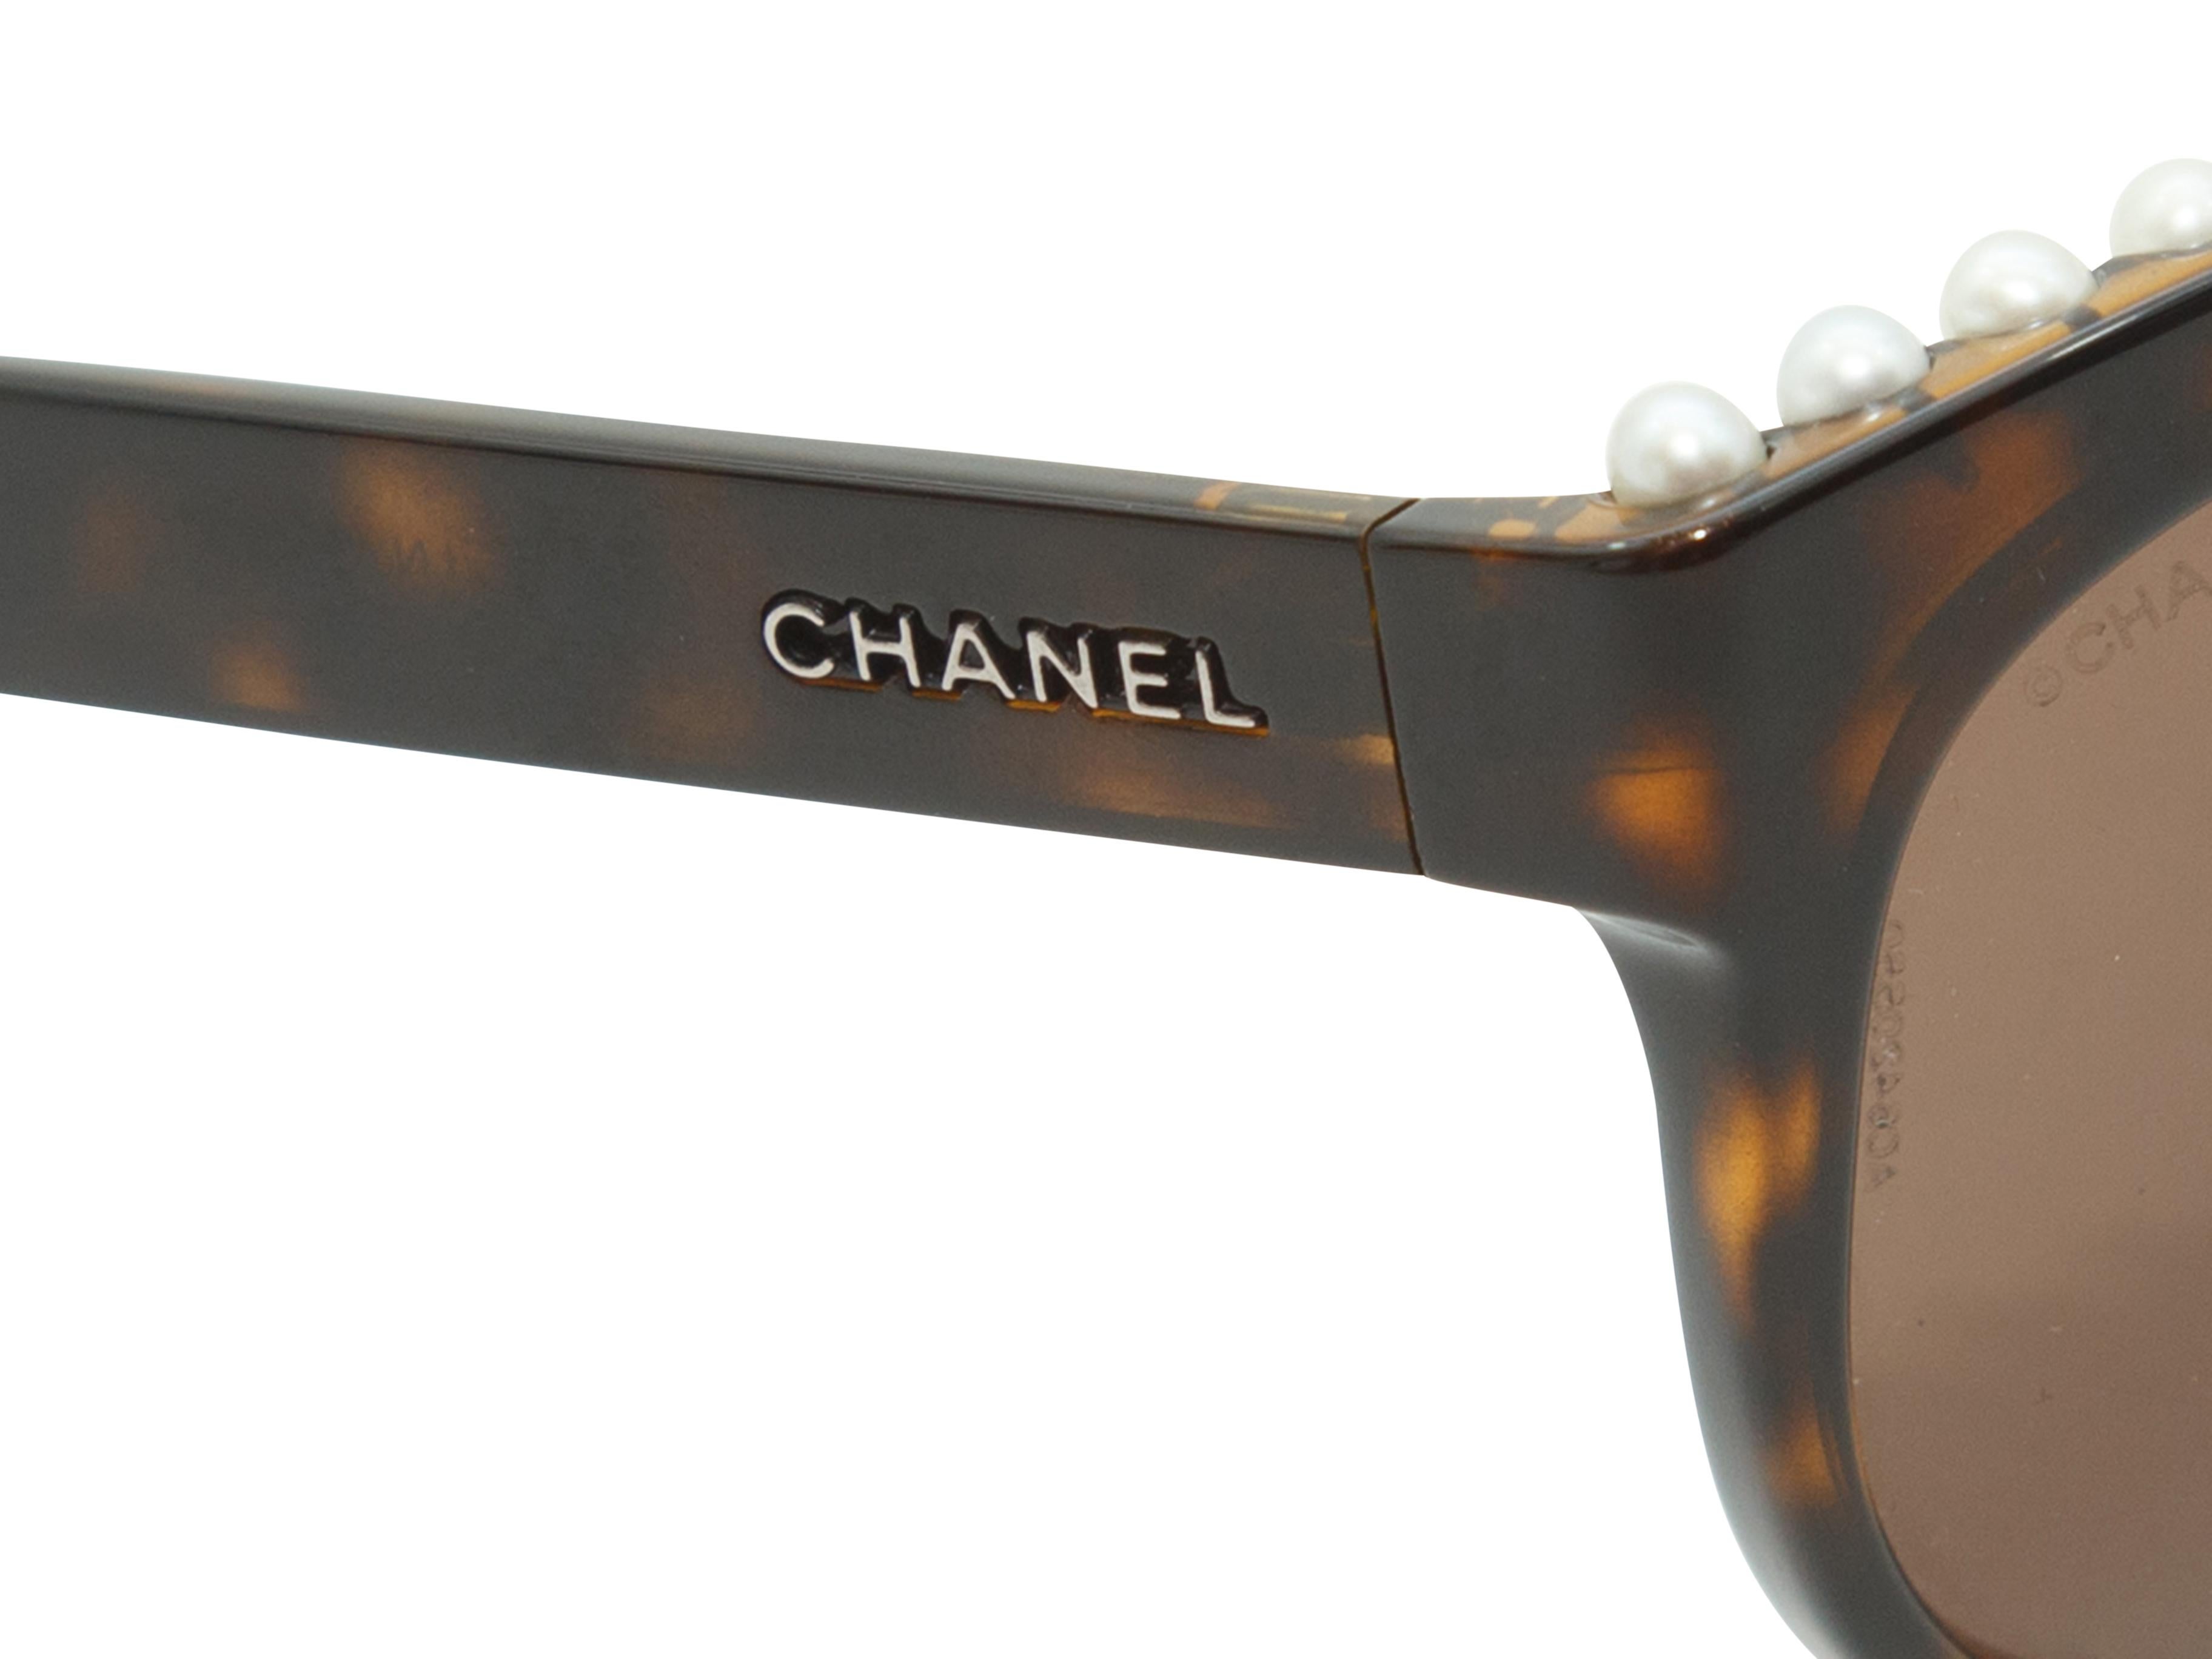 Product details: Tortoiseshell Chanel Pearl Trim Butterfly Shaped Sunglasses.  A line of pearls are perched on the top of the sunnies. The lenses are amber. Measurements: 5.5